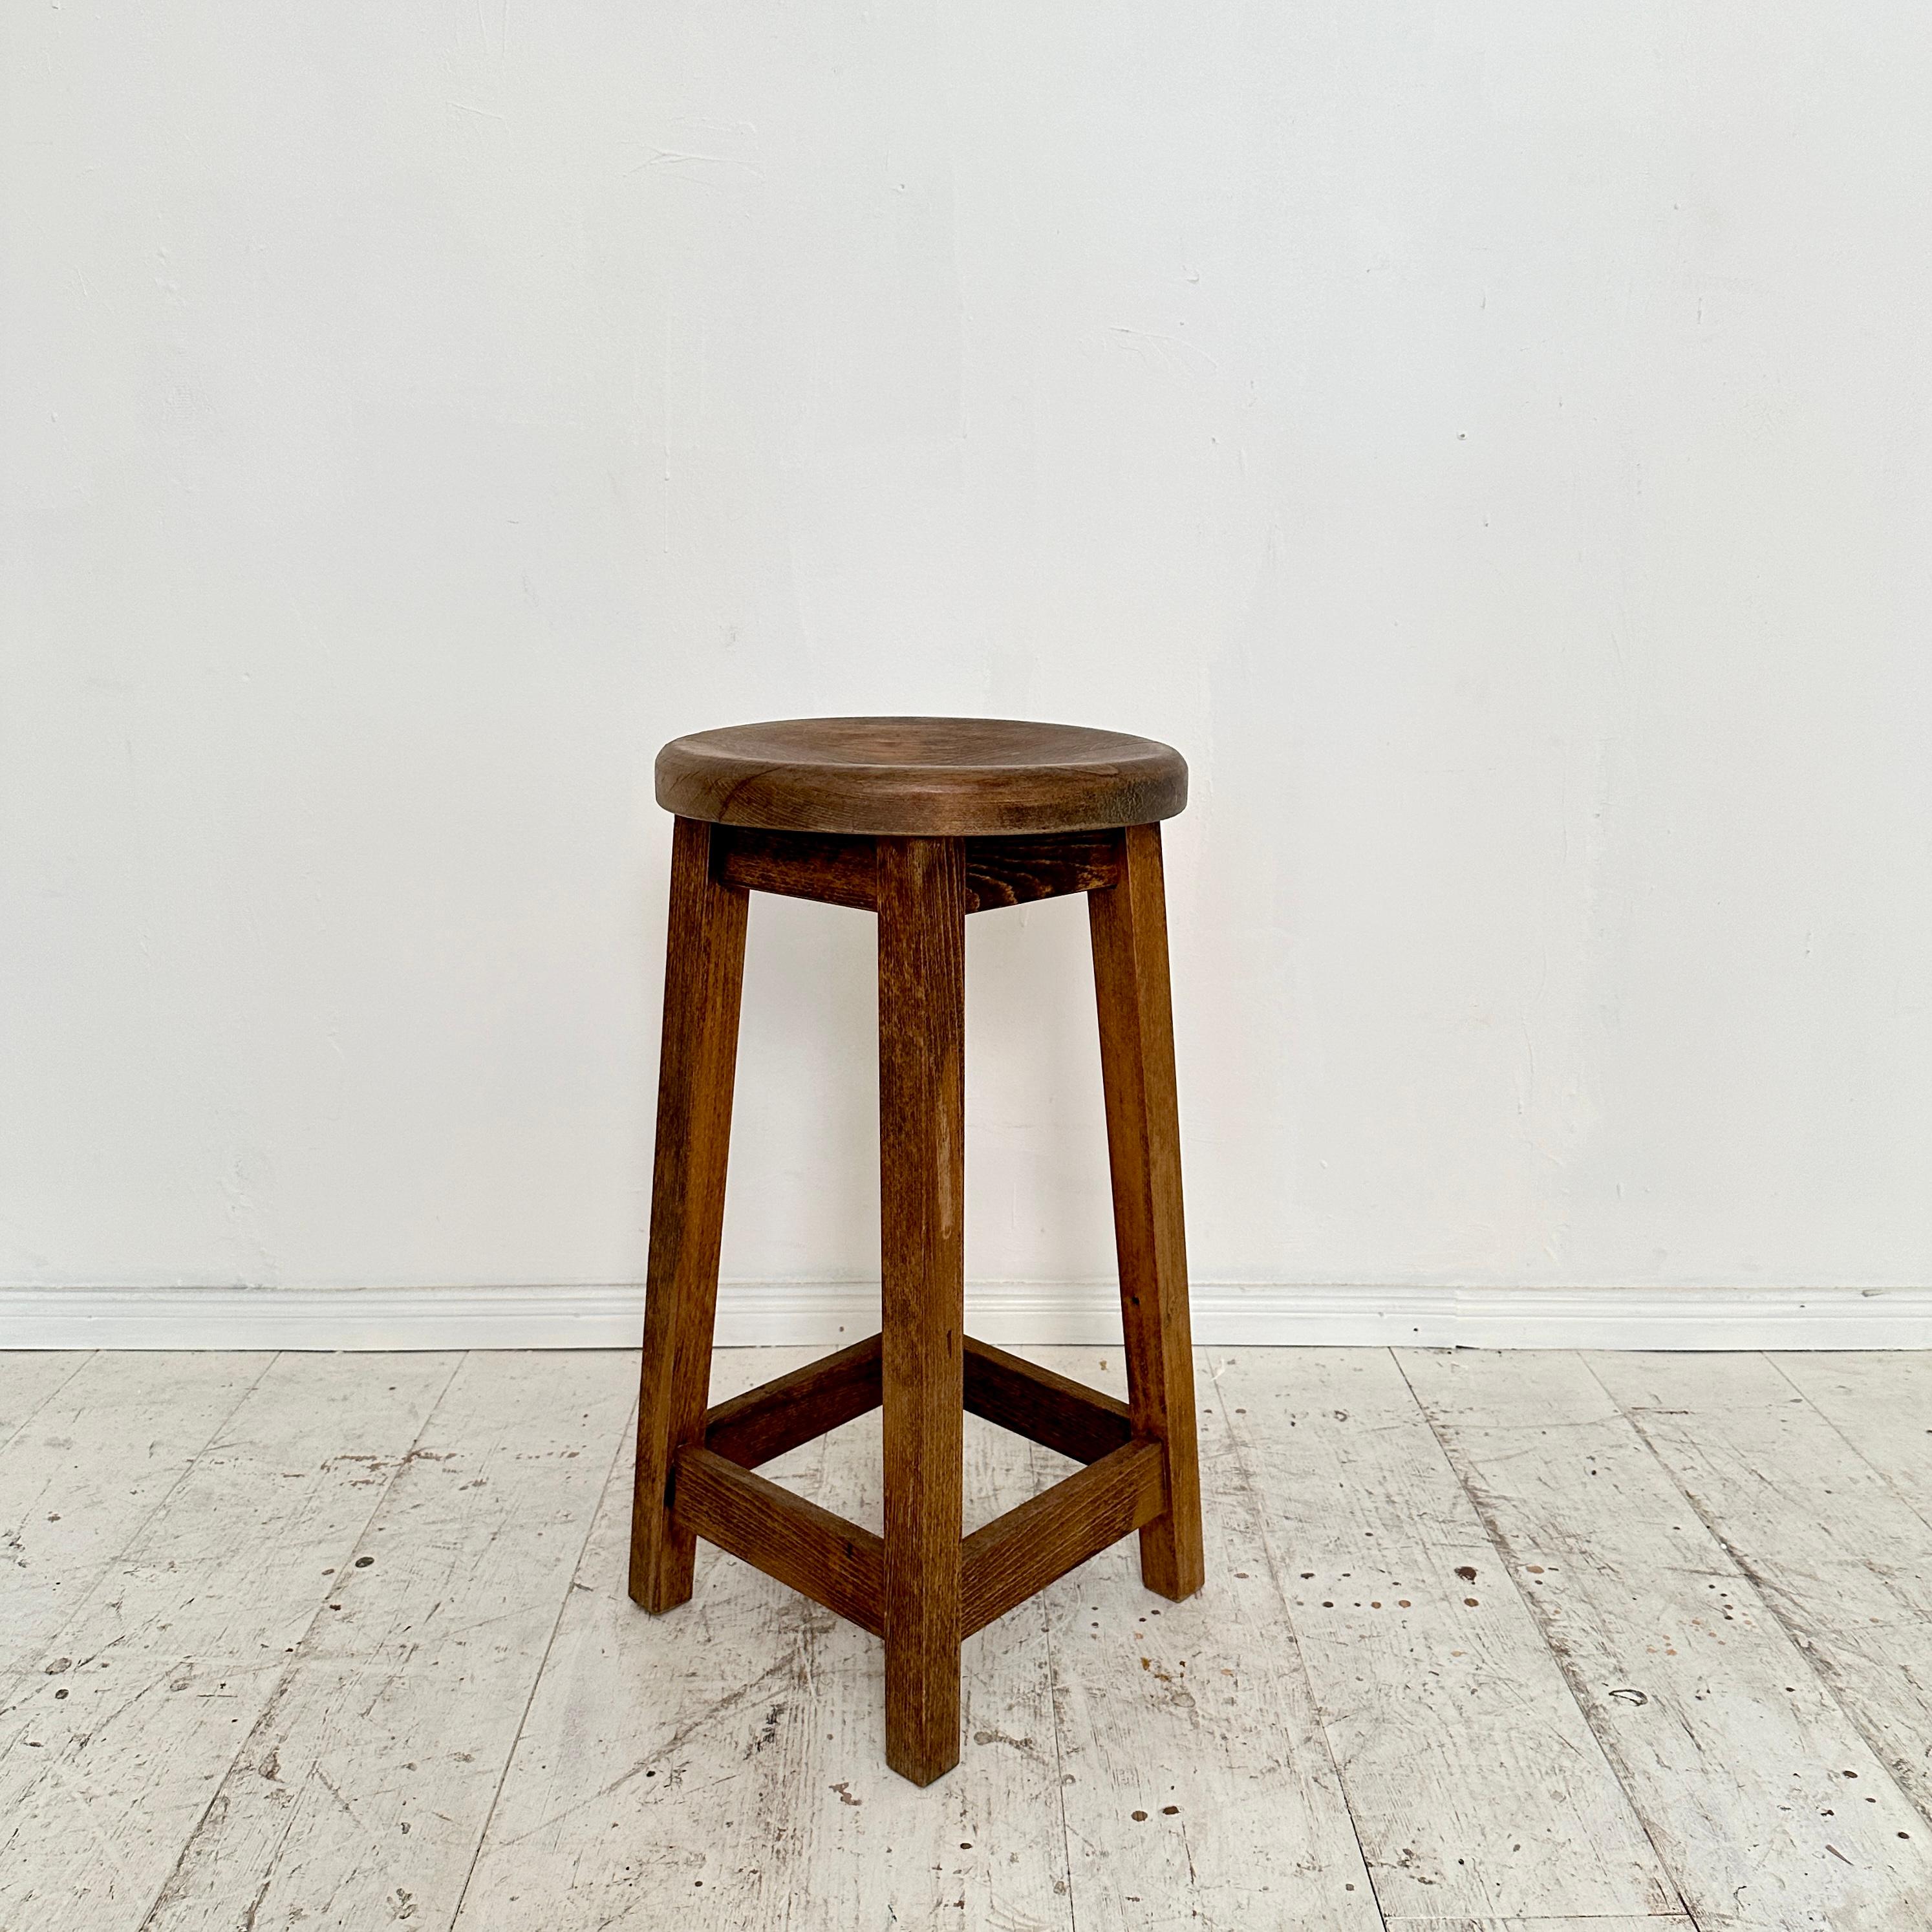 Transport yourself to the innovative spirit of the early 20th century with this iconic Bauhaus stool, crafted around 1920 from beech wood. Embodying the principles of form follows function, its minimalist design reflects the Bauhaus movement's ethos